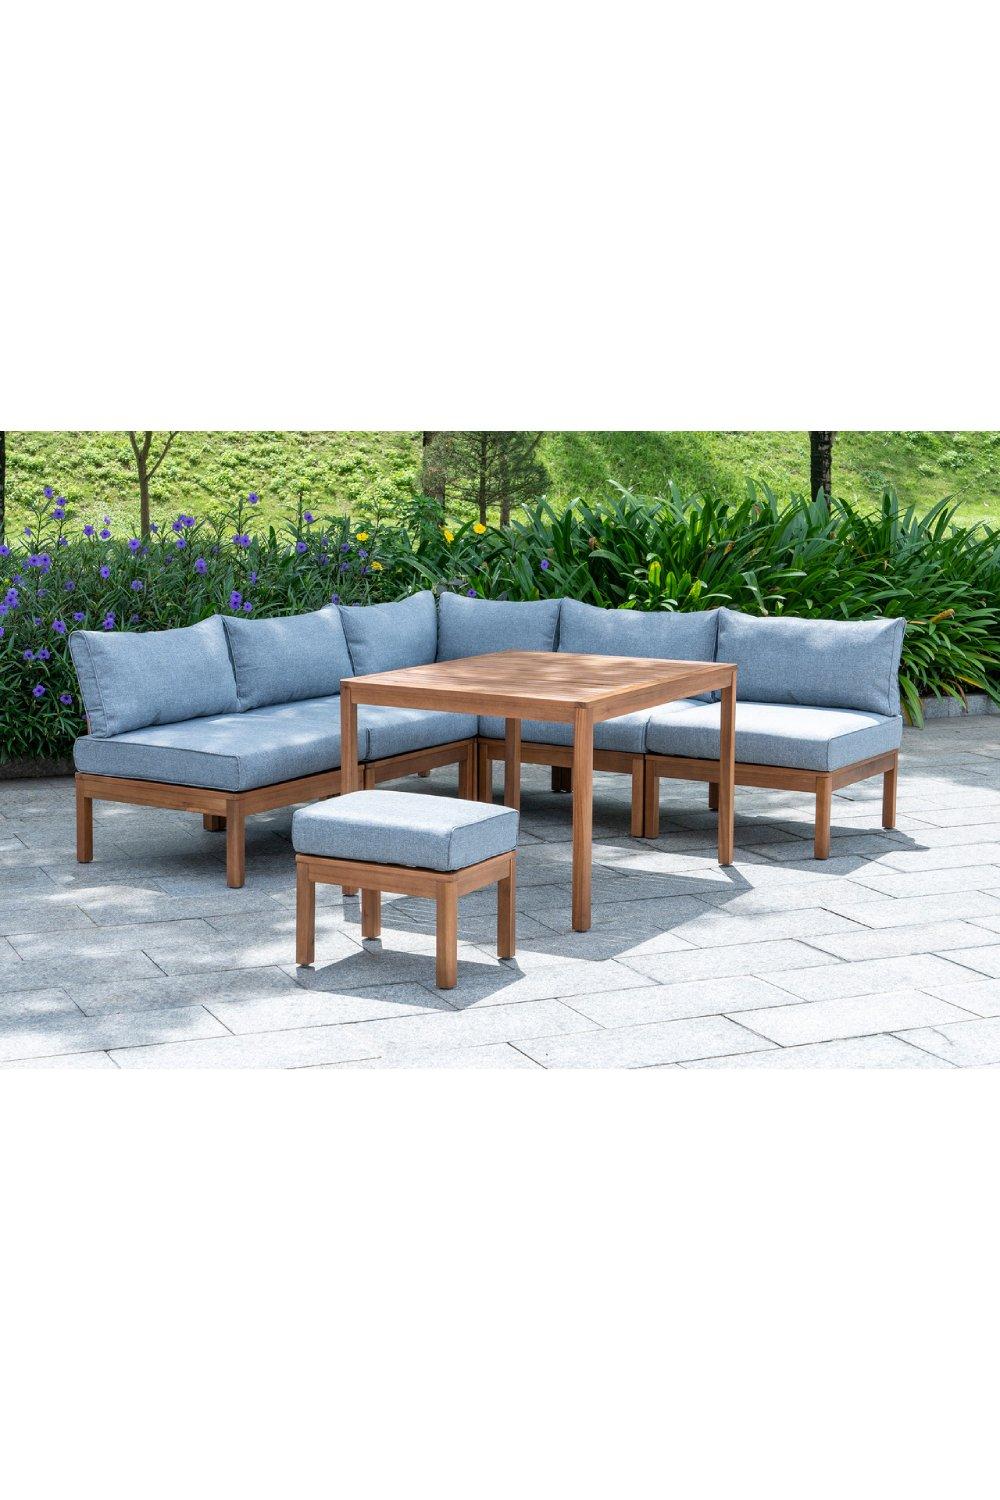 Cali - Wooden Garden Lounge Set with Stool - 6 Seats